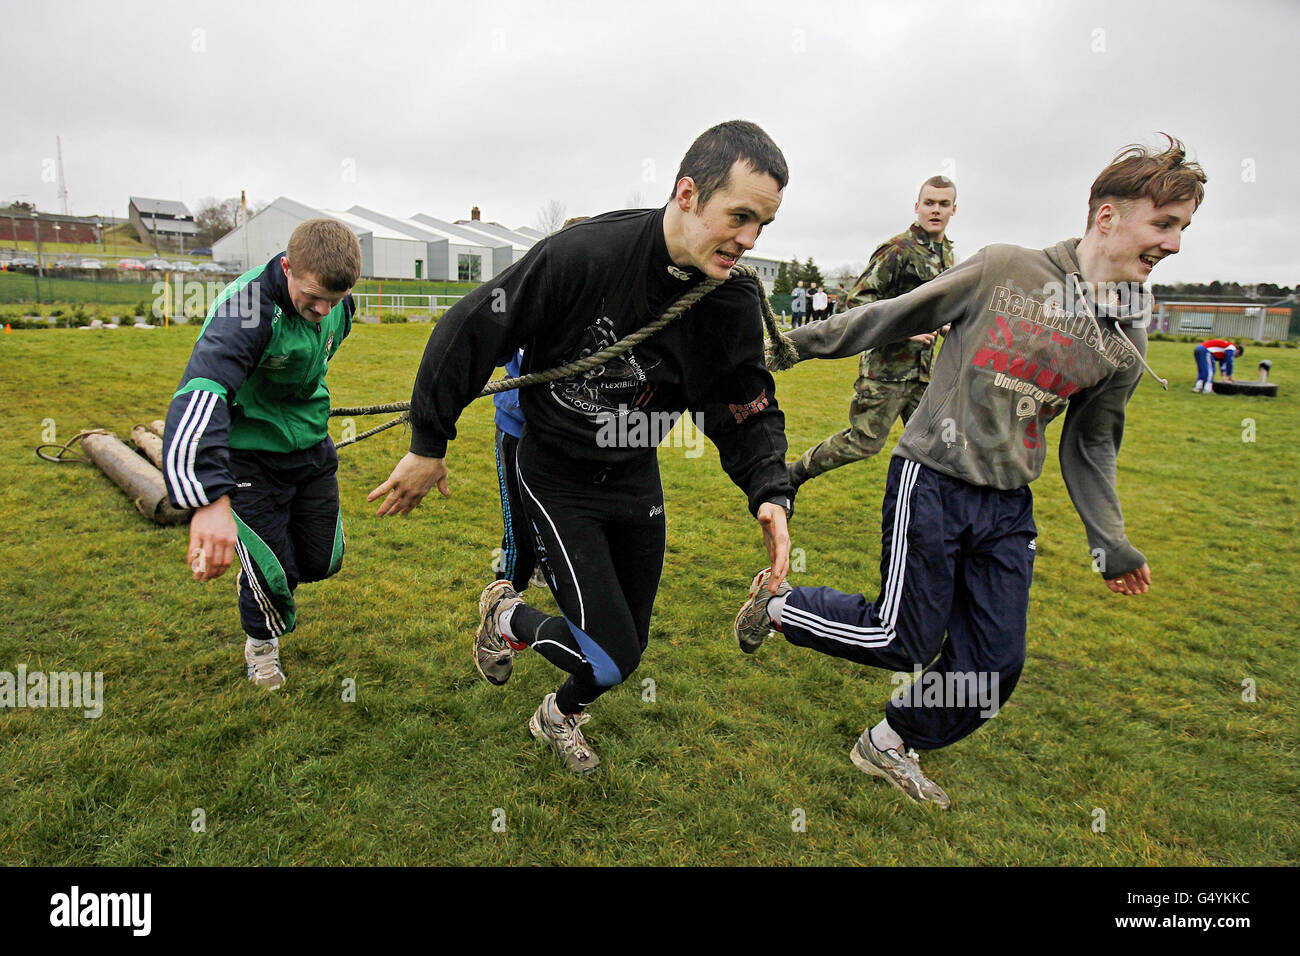 Ireland's Darren O'Neill (centre), Ciaran Forde (left) and Michael O'Reilly drag logs during the Irish Defence Forces endurance and team building assault course at the Curragh Army Camp, Curragh. Stock Photo